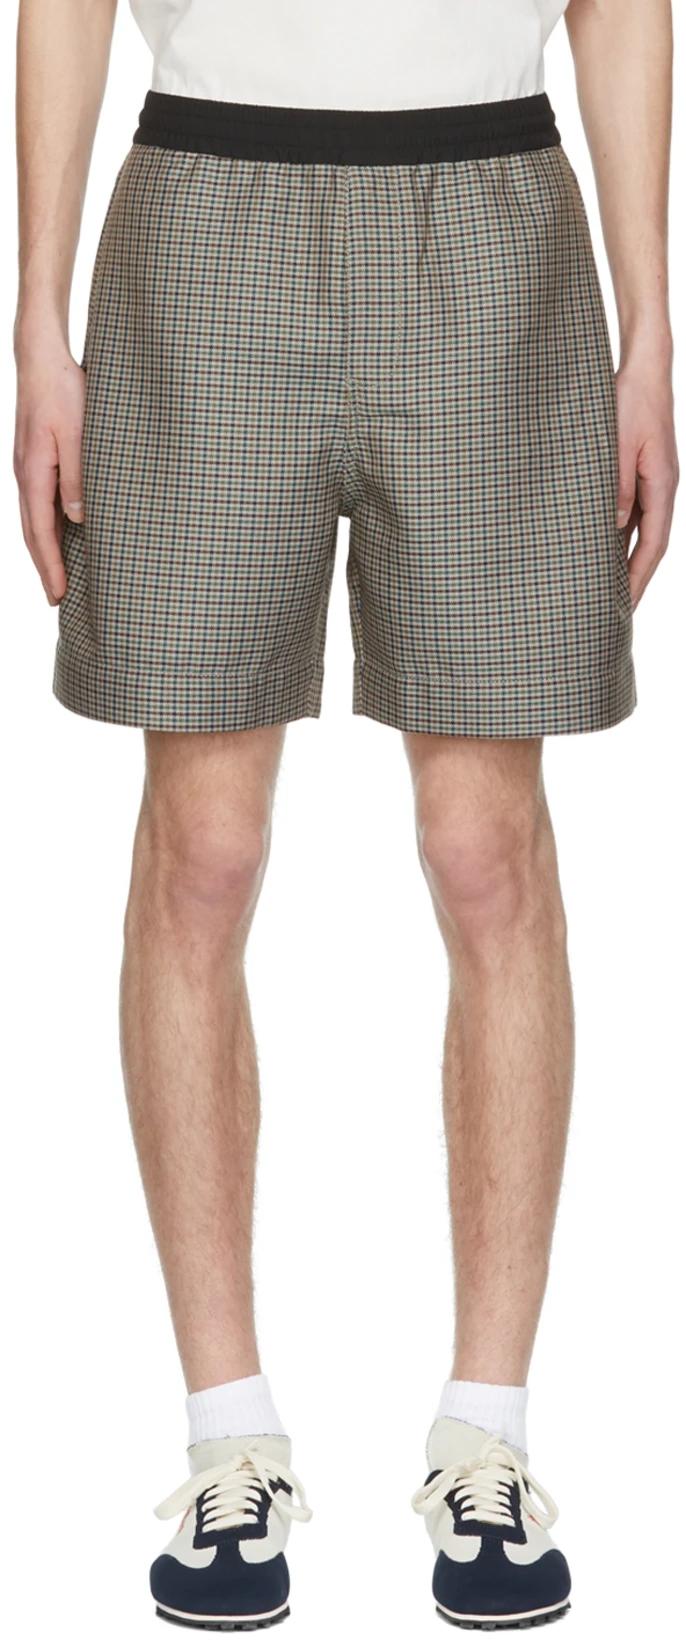 Grey Polyester Shorts by A PERSONAL NOTE 73